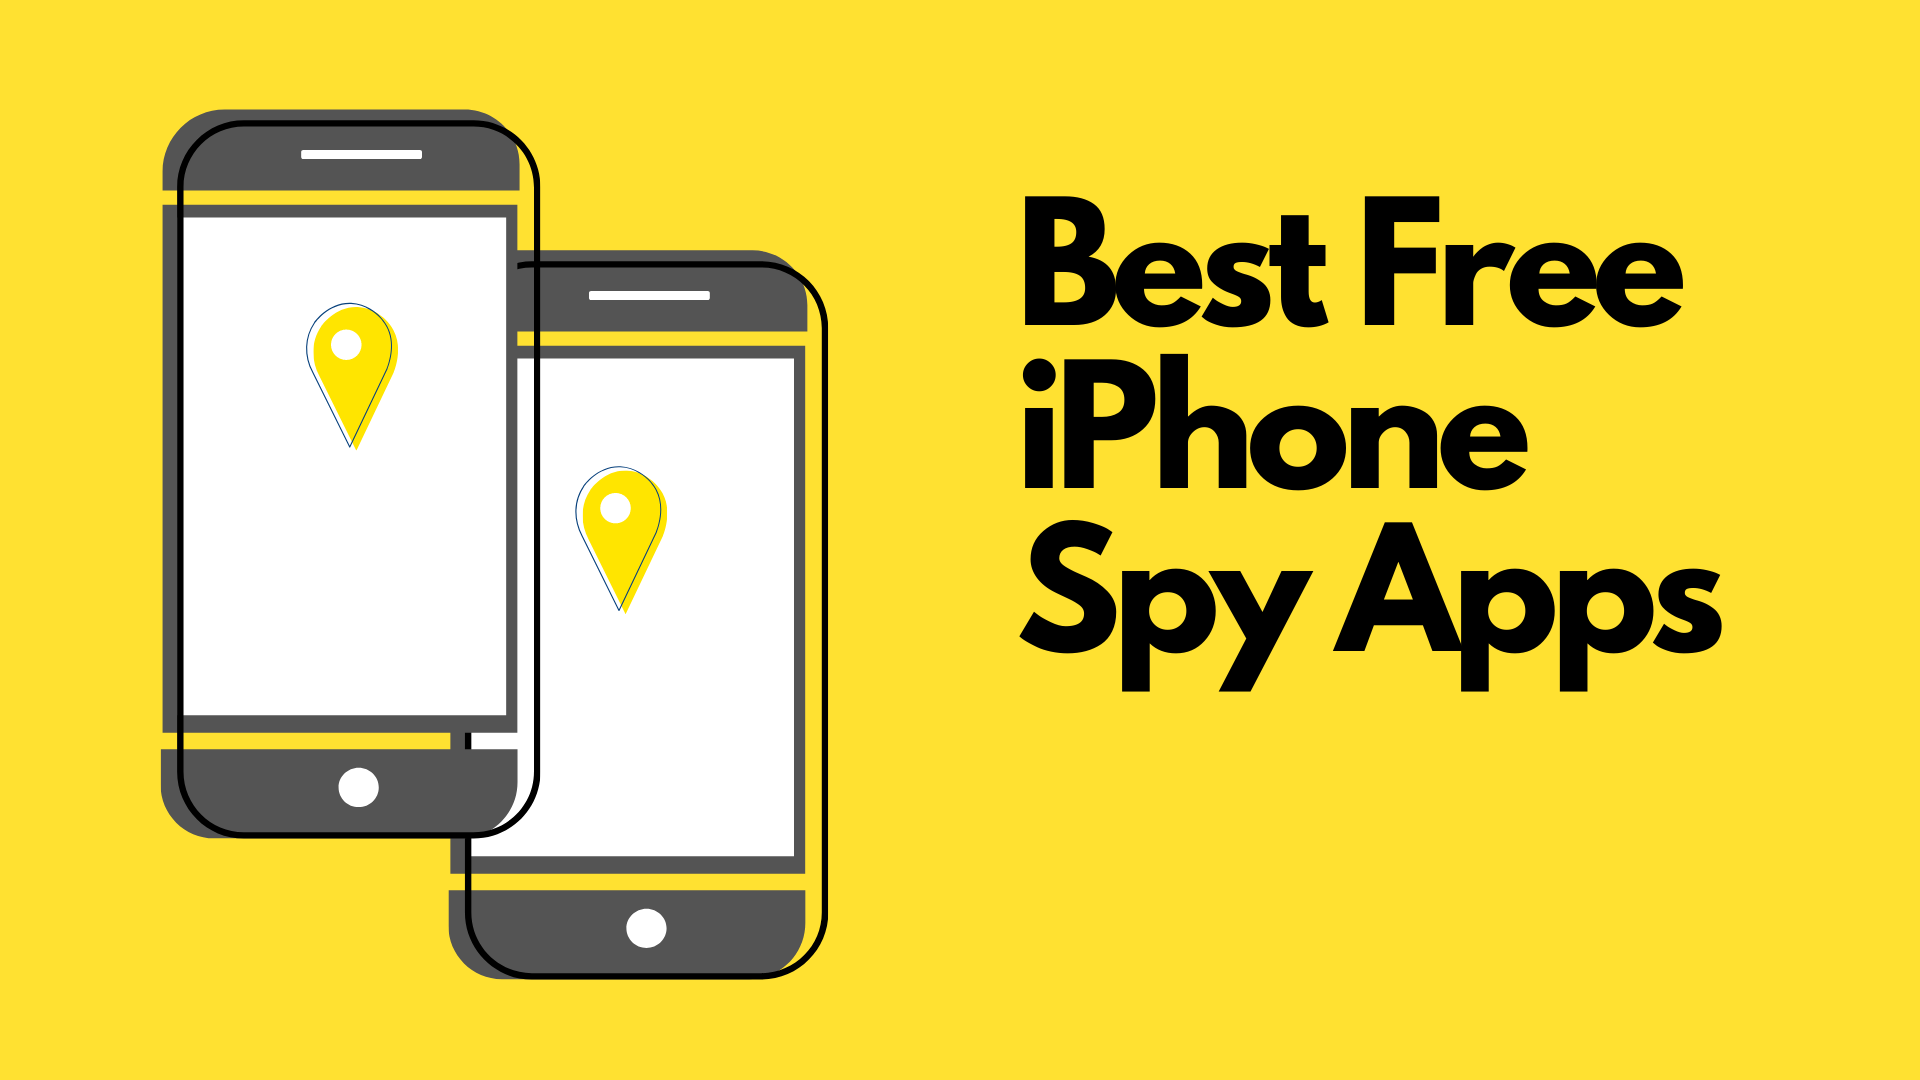 Best Free iPhone Spy Apps in 2021